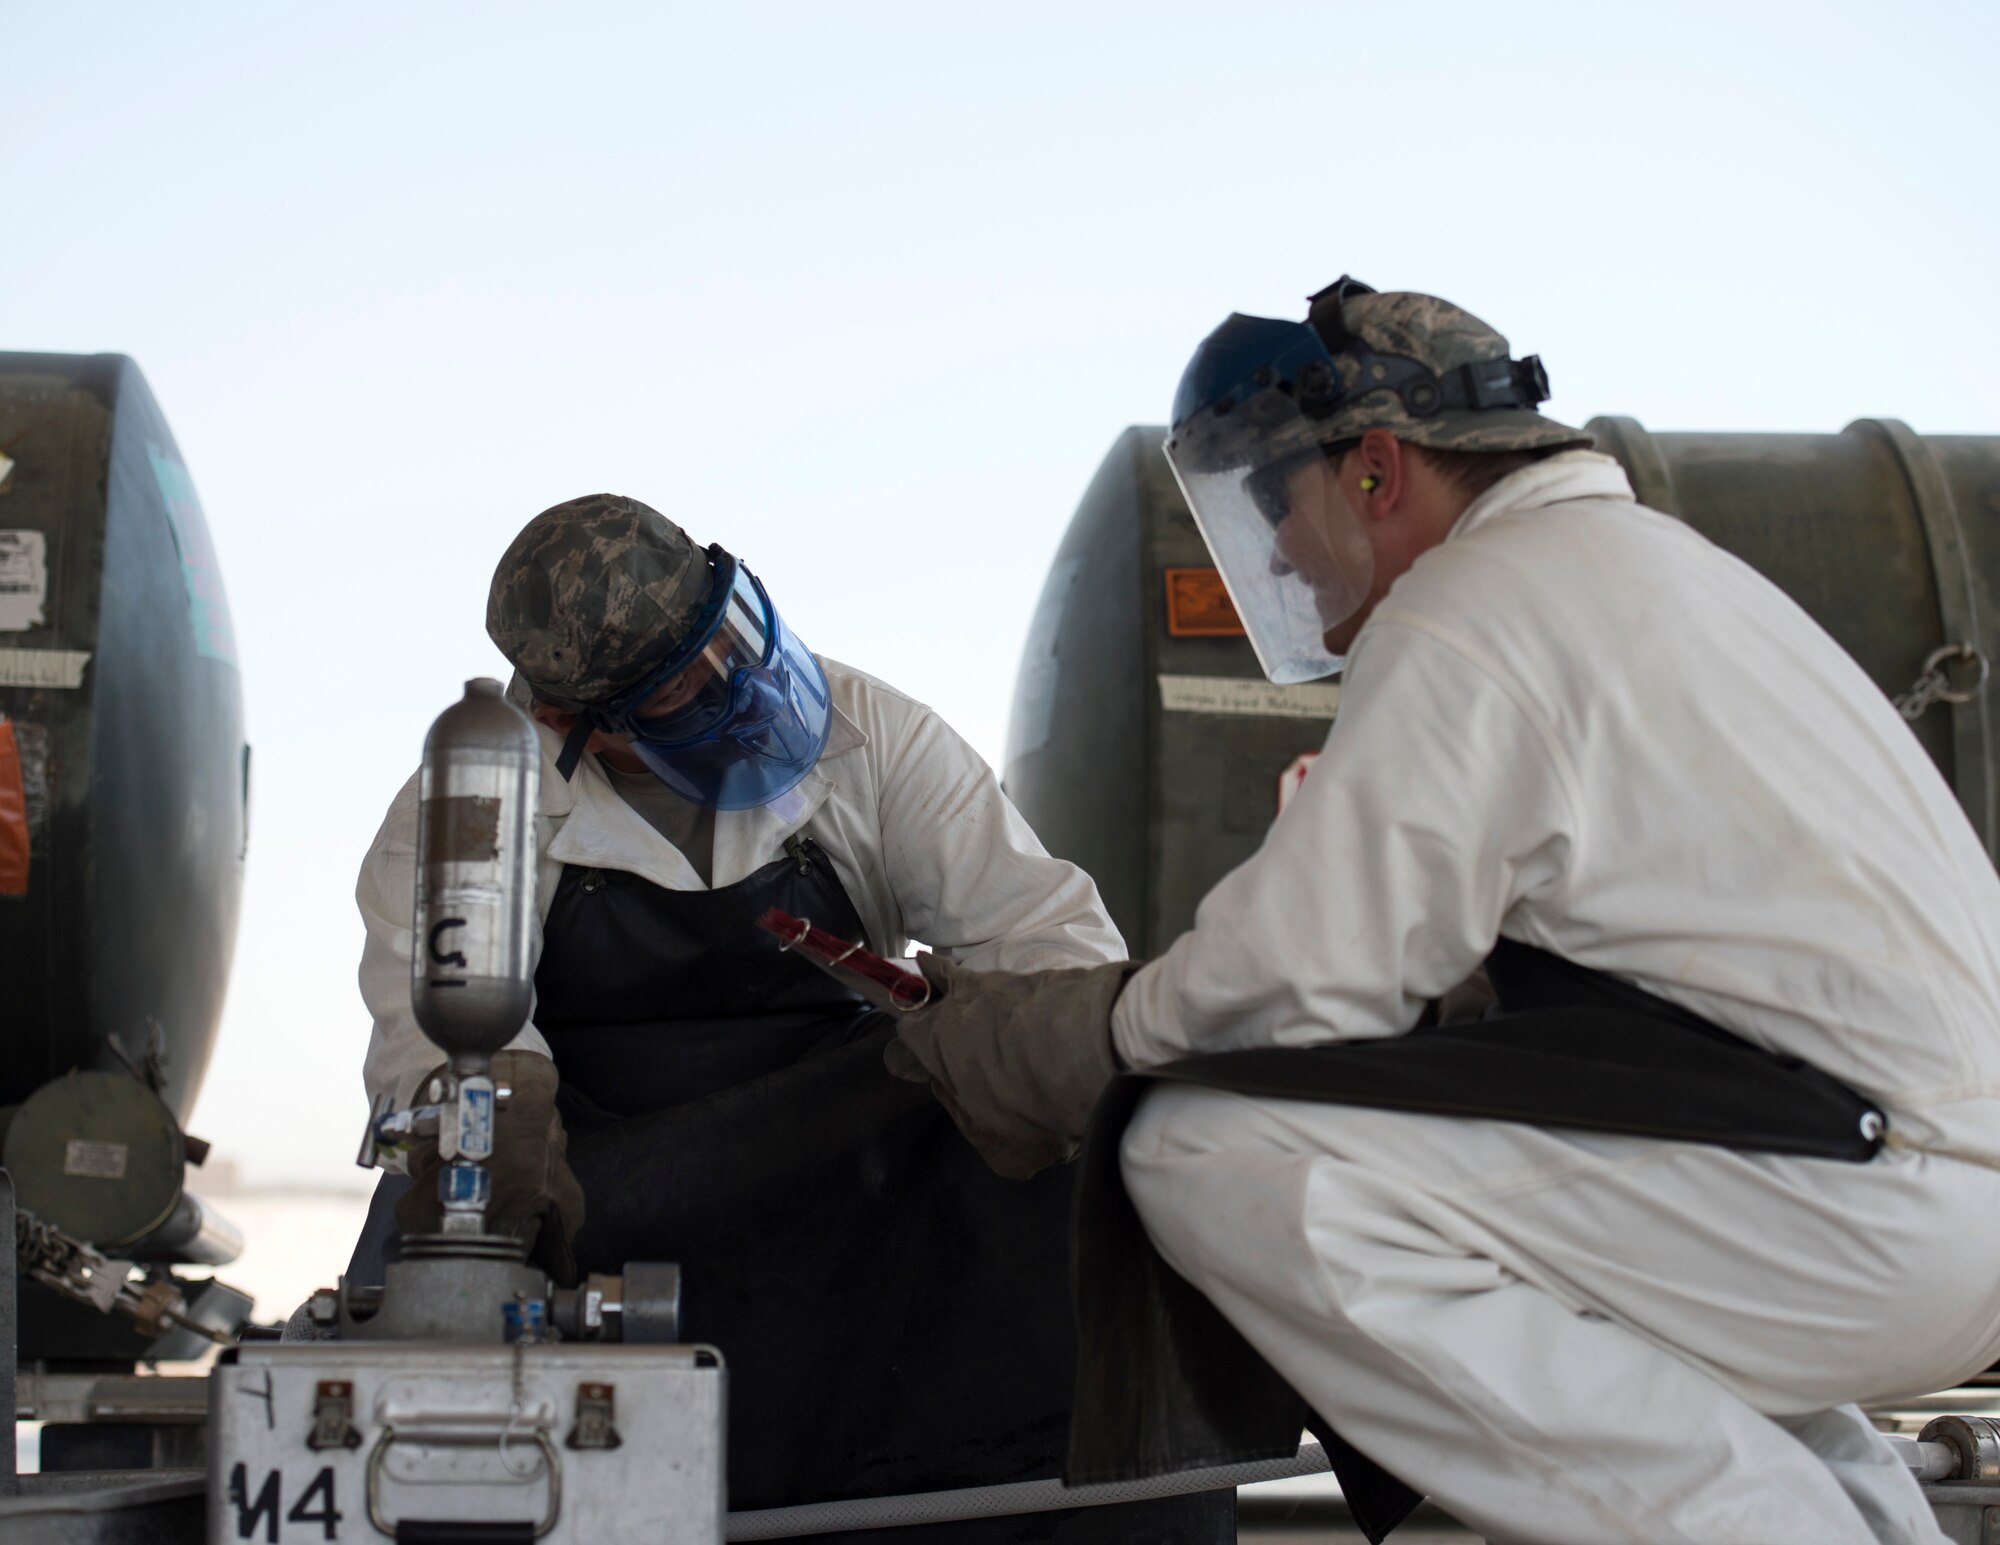 U.S. Air Force Staff Sgt. Kennie Delmo, left, a cryogenics supervisor and Senior Airman Samuel Fallot, a cryogenics journeyman with the 379th Expeditionary Logistics Readiness Squadron, Fuels Management Flight, review their checklist at Al Udeid Air Base, Qatar, Aug. 9, 2017.